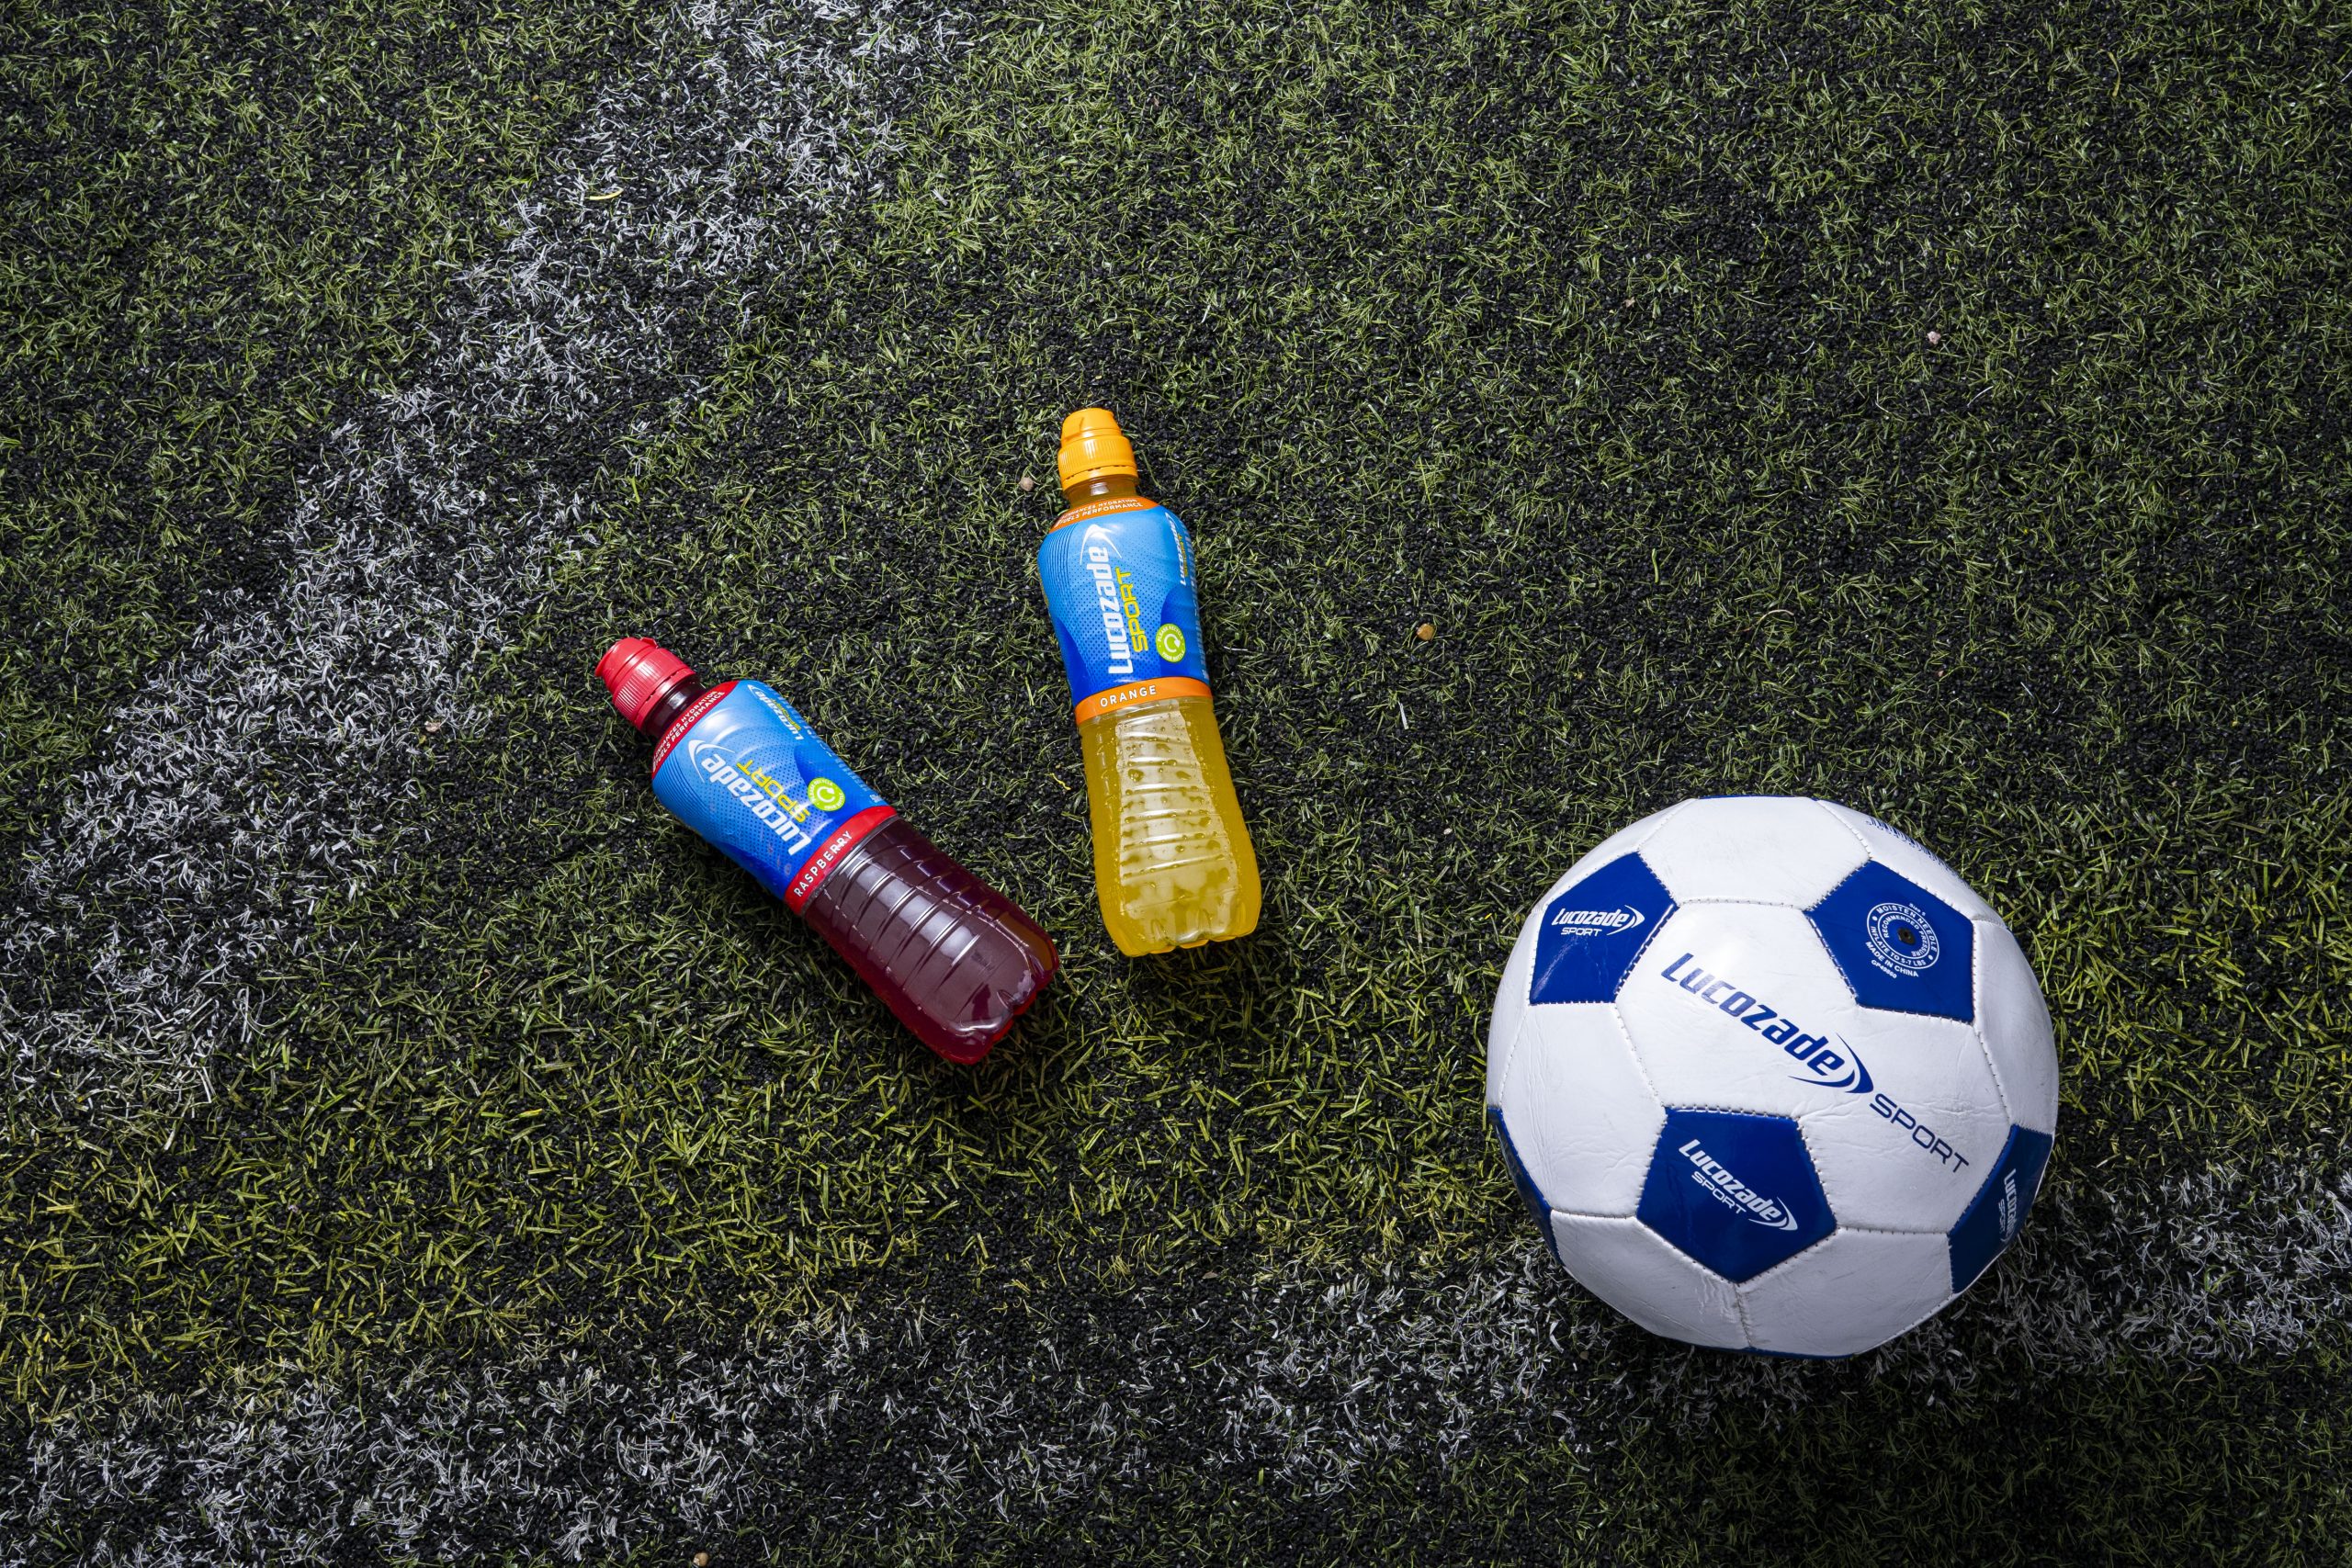 Kick off summer sales with new Lucozade Sport shopper soccer promotion